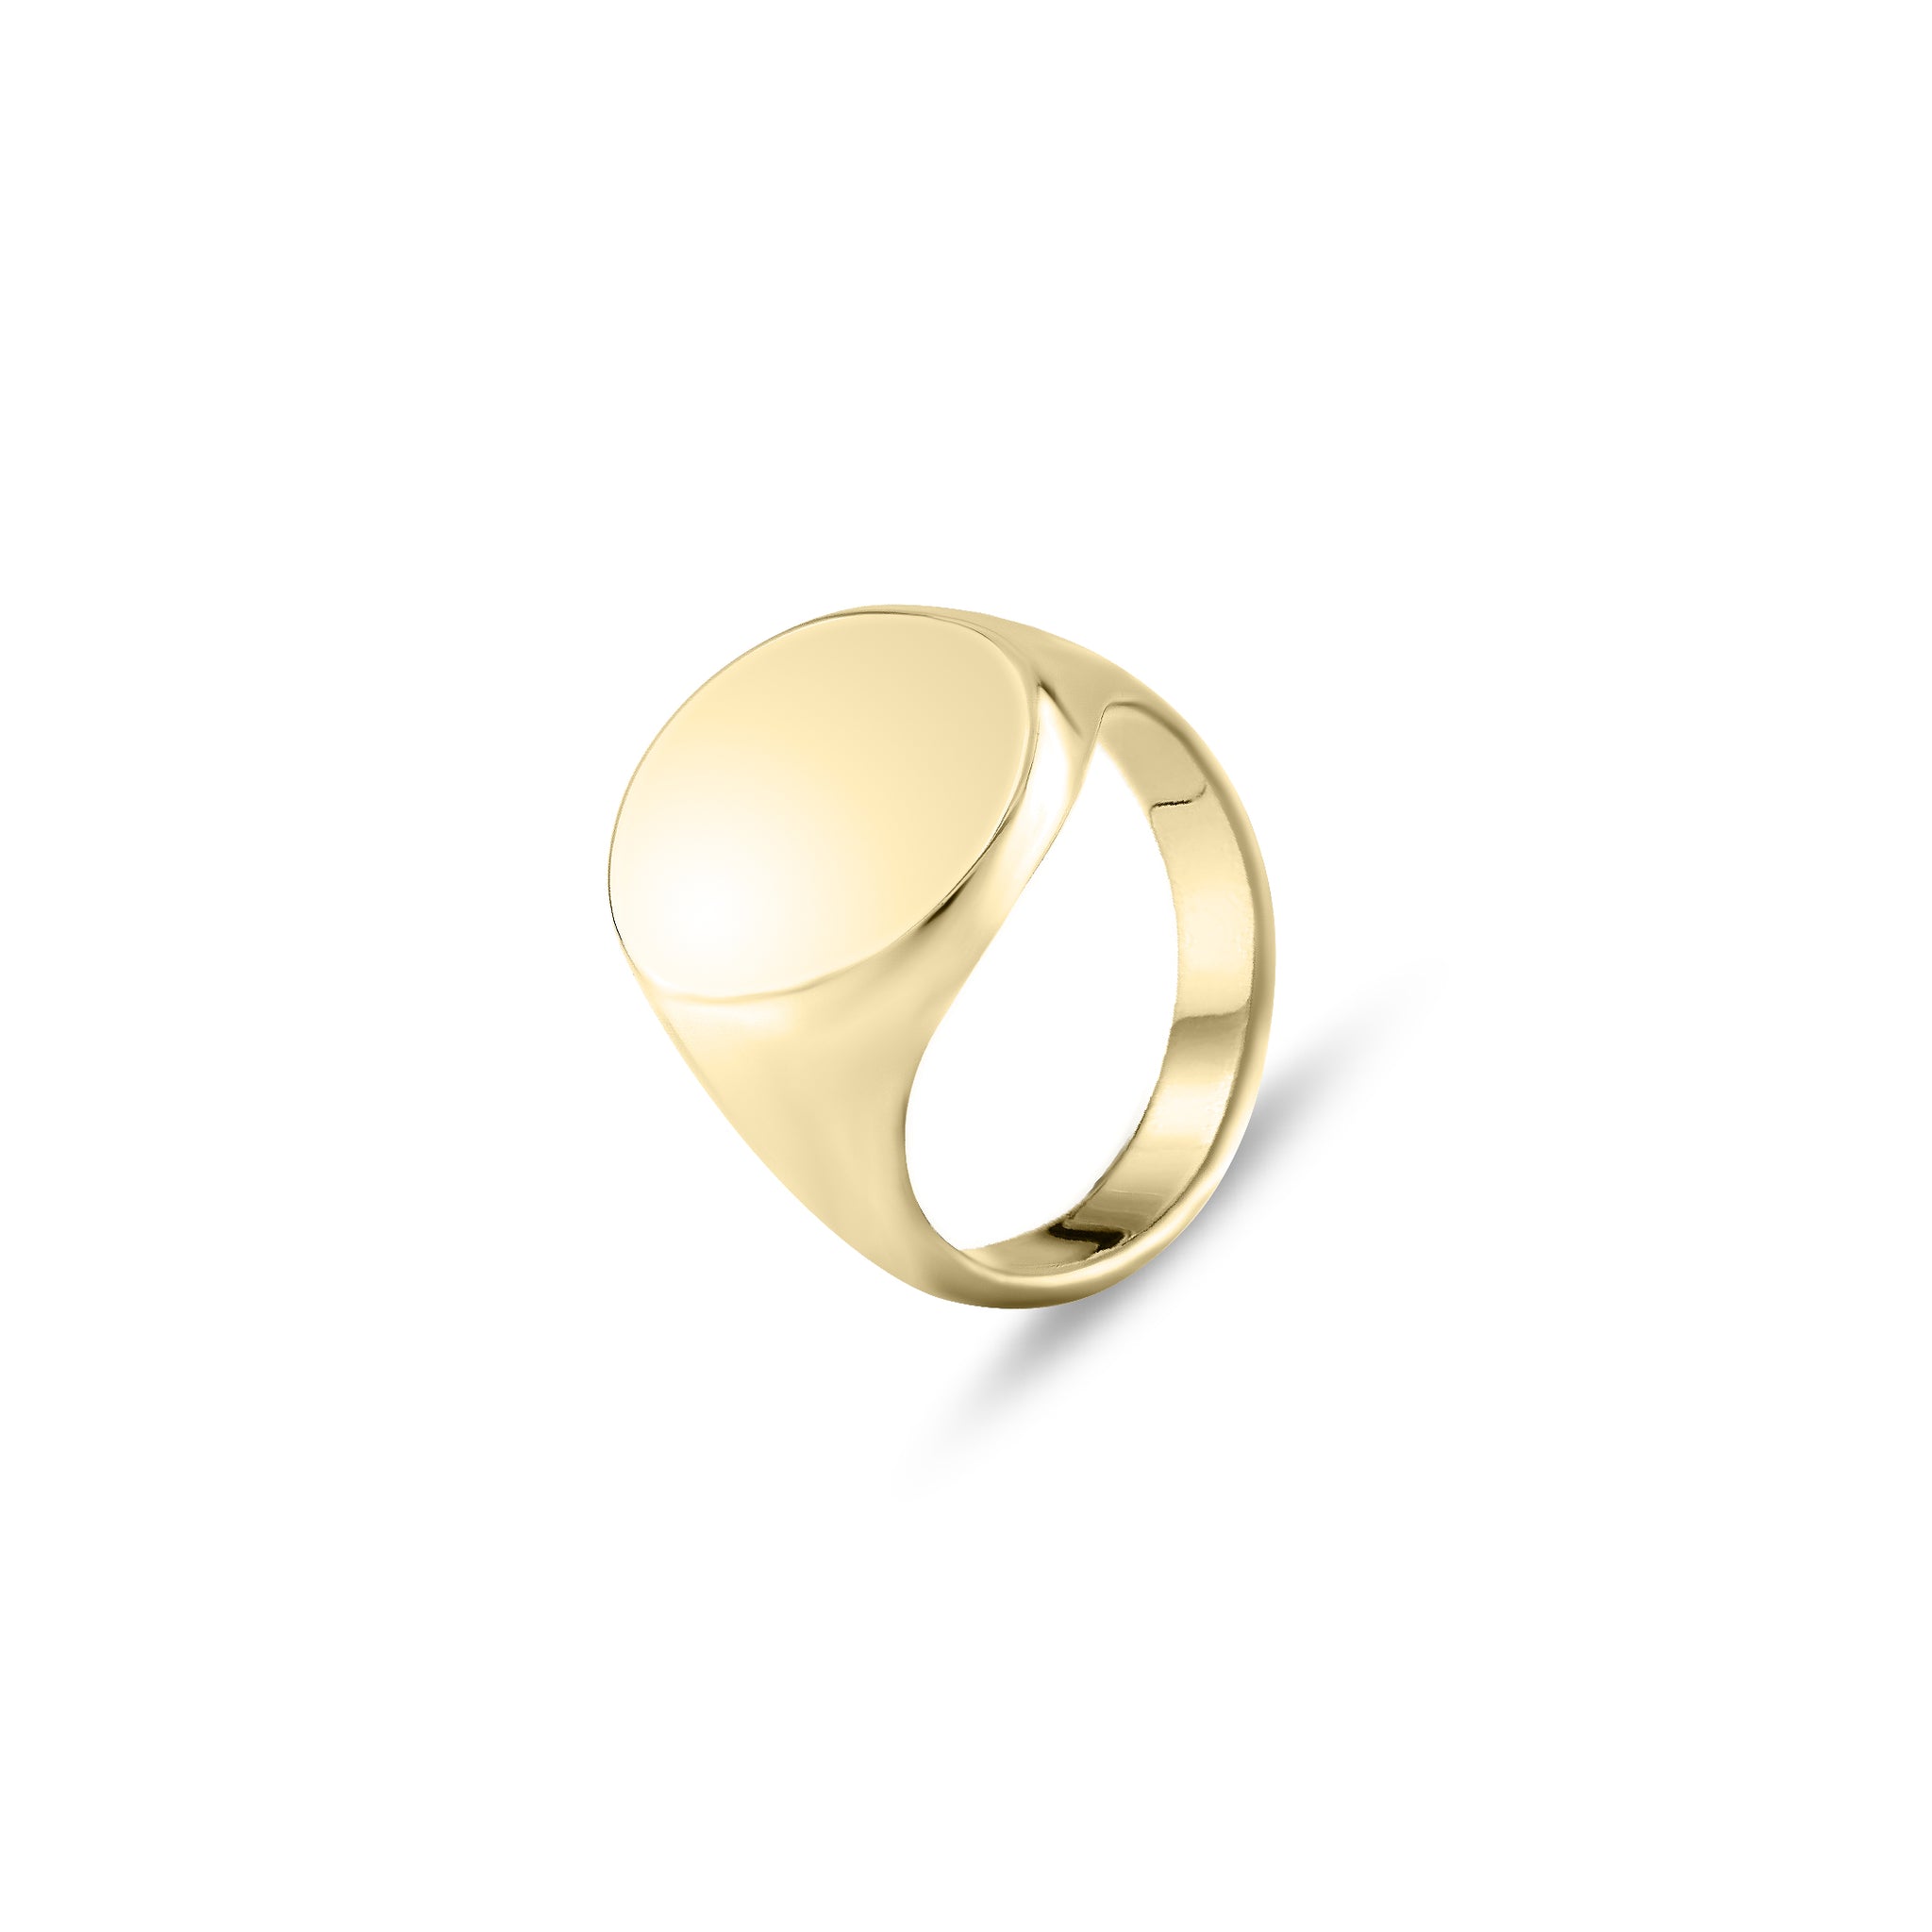 The Anthony Paul Signet Ring